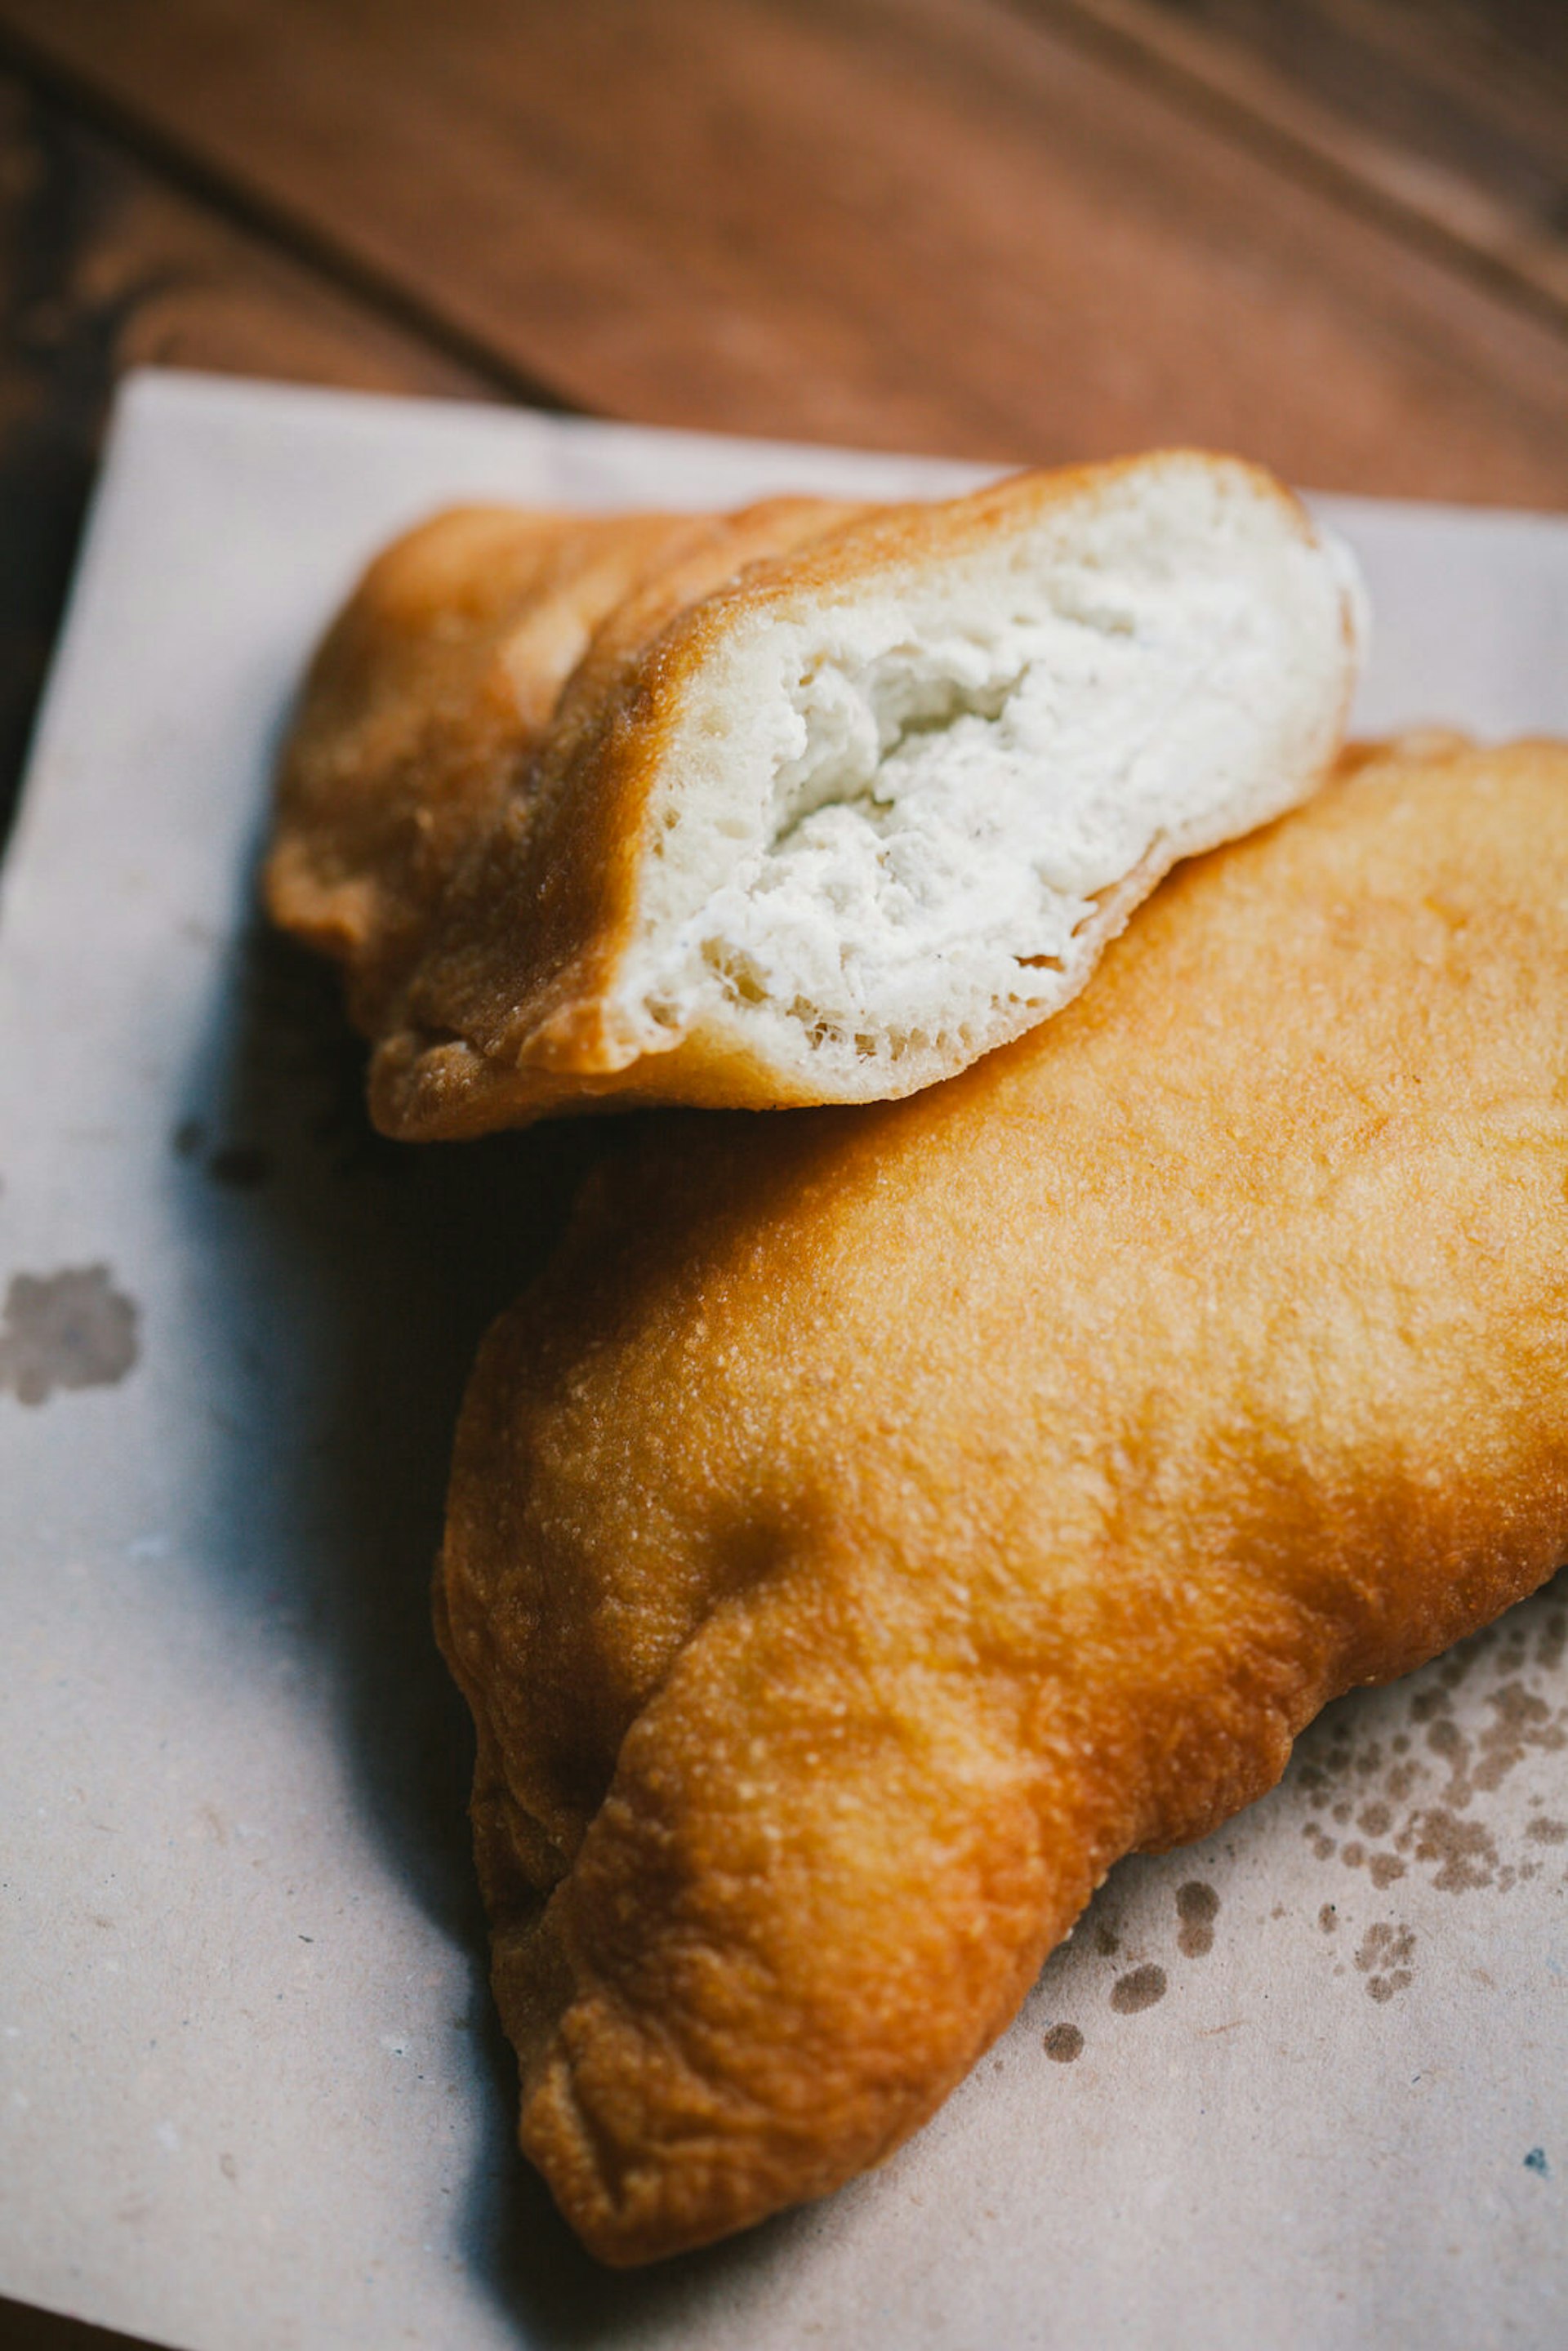 Deep fried pizza filled with ricotta cheese © Angelafoto / Getty Images